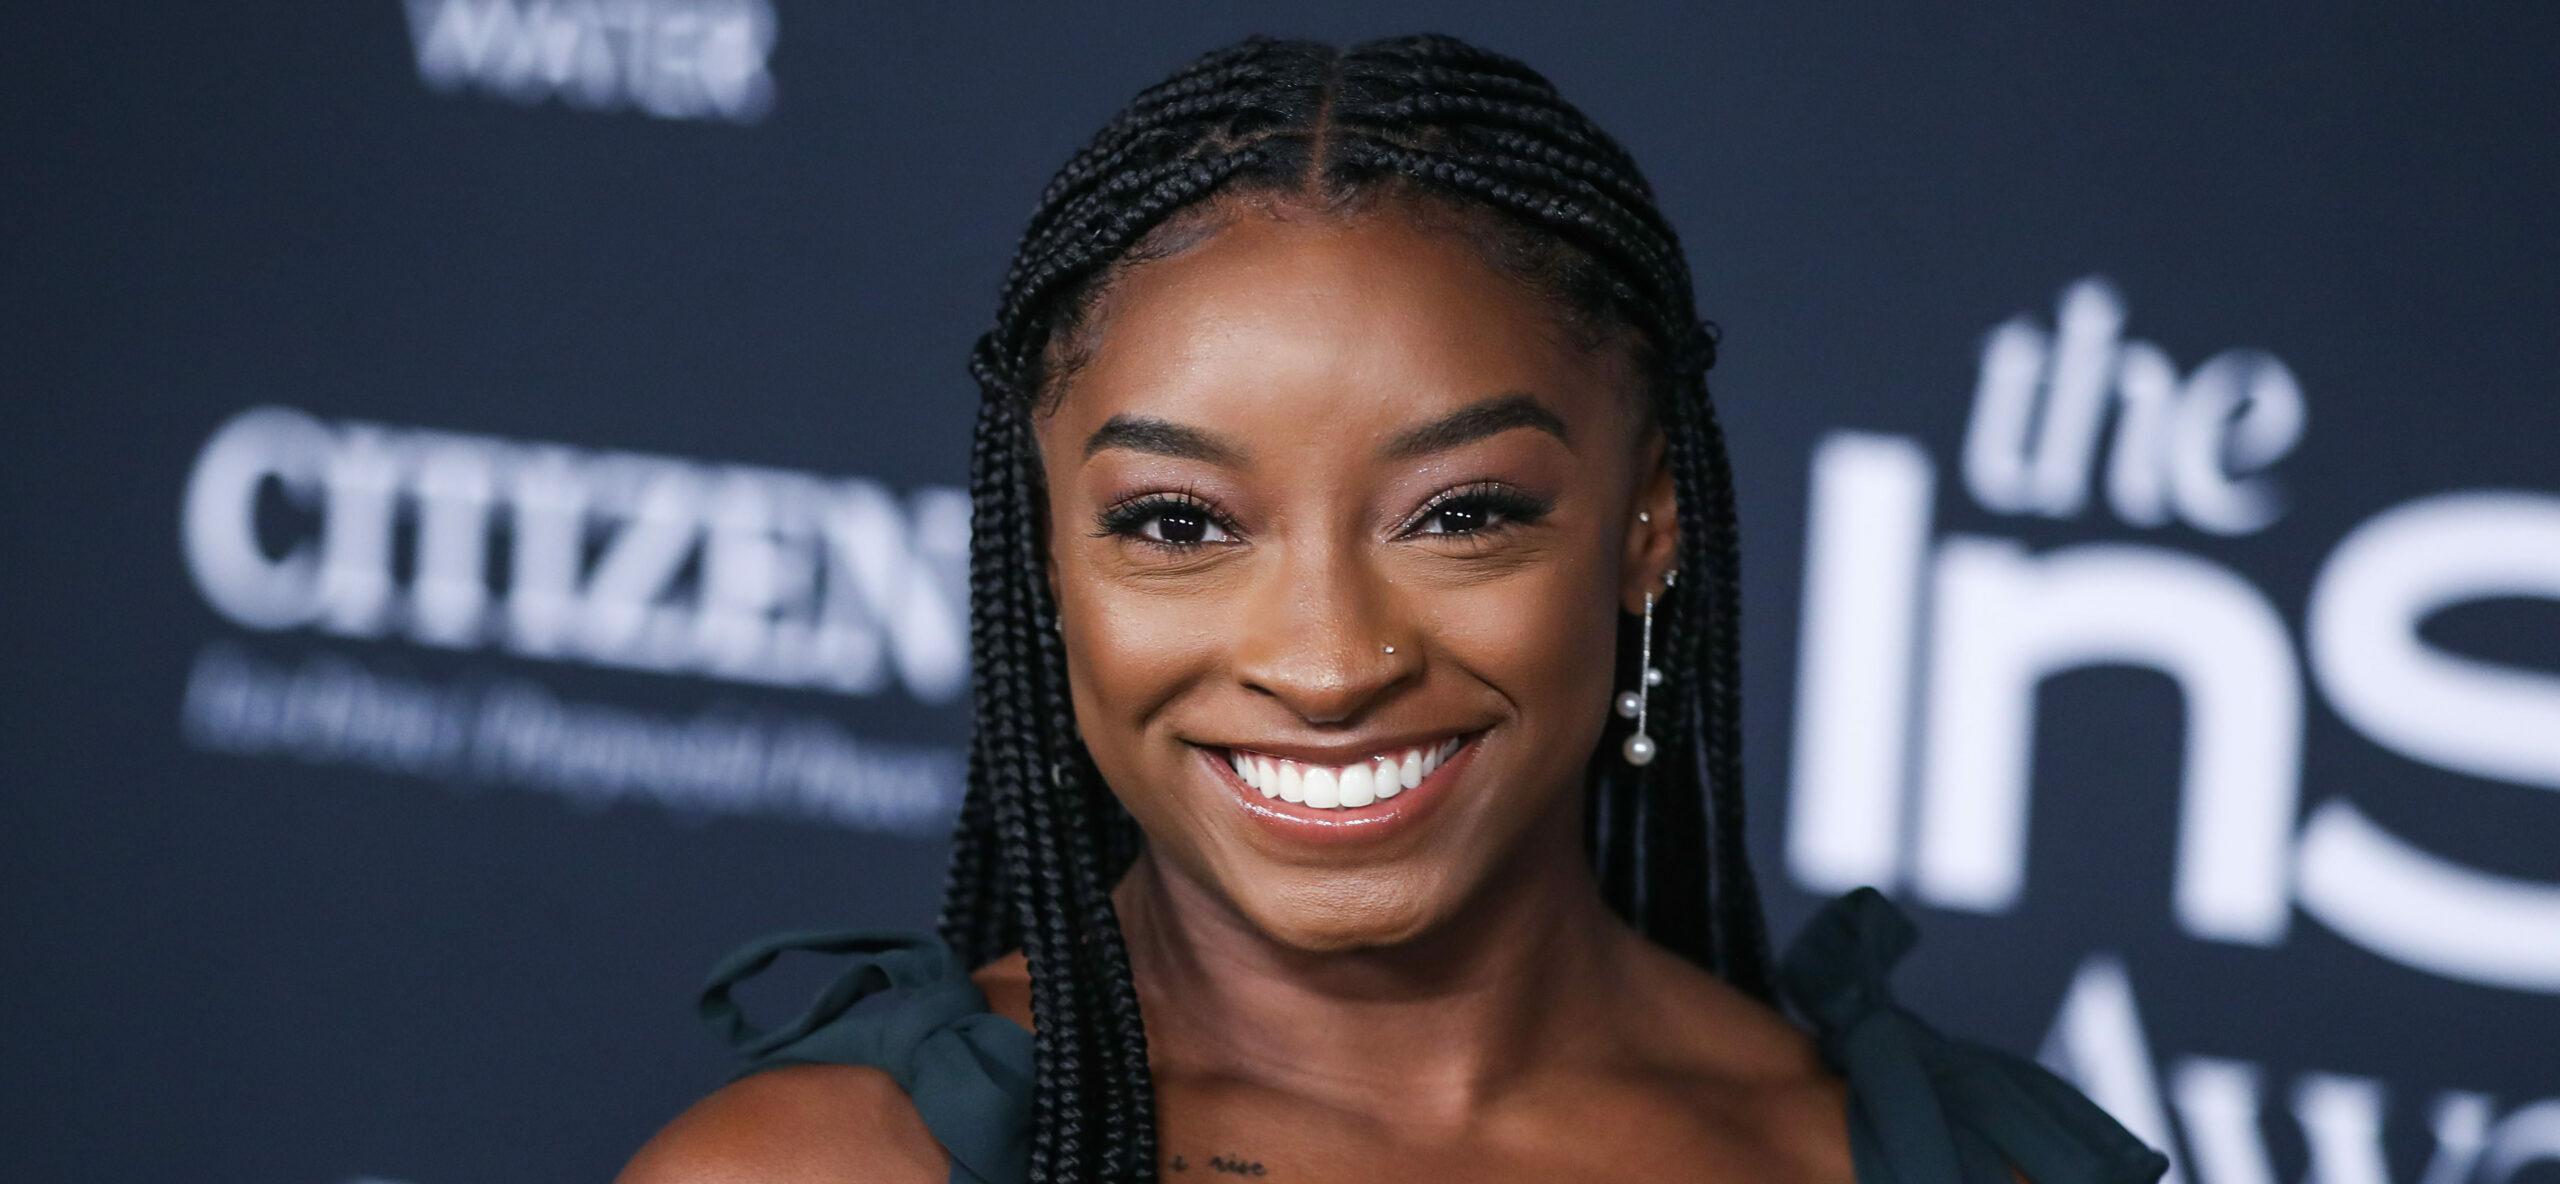 Simone Biles Claps Back: ‘Who Is Jenna Ellis? Asking For Everyone’